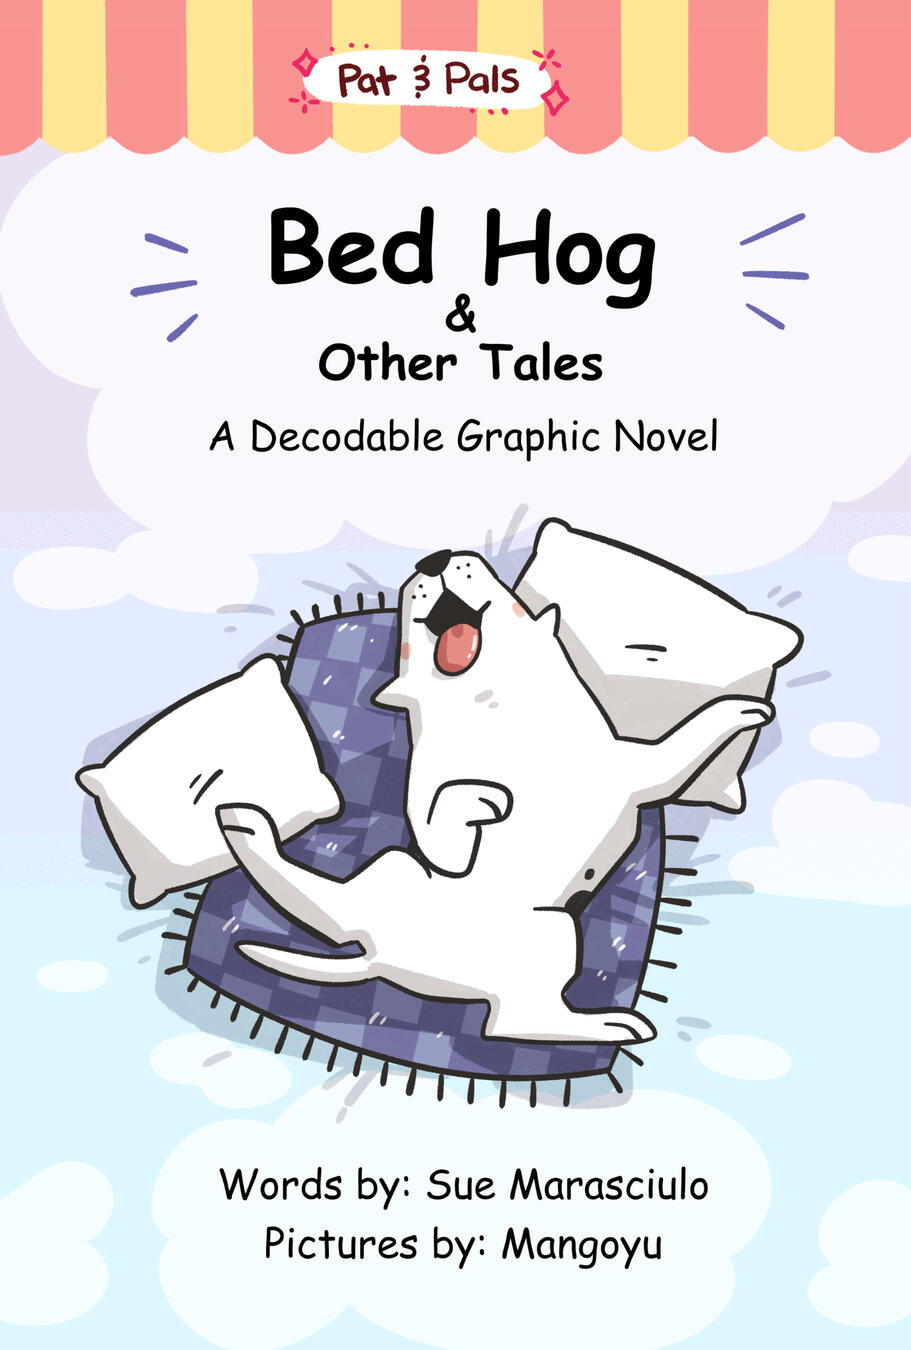 Book 3: Bed Hog & Other Tales